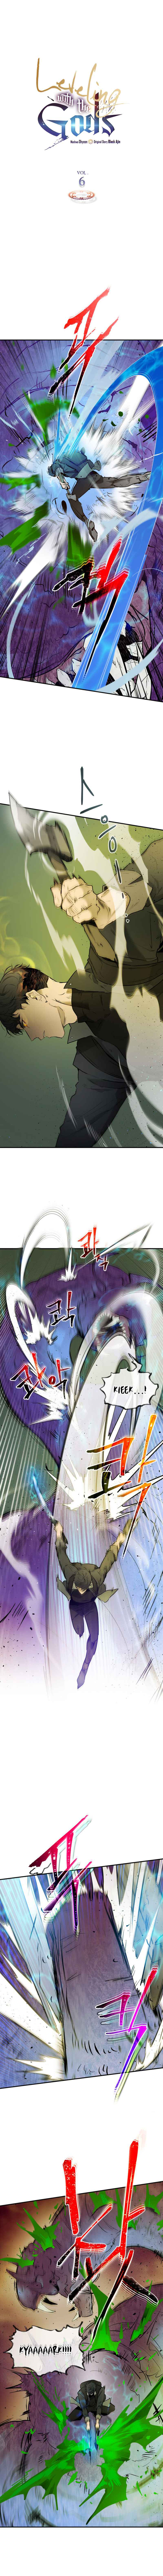 Leveling With The Gods Chapter 6, Leveling With The Gods 6, Read Leveling With The Gods Chapter 6, Leveling With The Gods Chapter 6 Manga, Leveling With The Gods Chapter 6 english, Leveling With The Gods Chapter 6 raw manga, Leveling With The Gods Chapter 6 online, Leveling With The Gods Chapter 6 high quality, Leveling With The Gods 6 chapter, Leveling With The Gods Chapter 6 manga scan